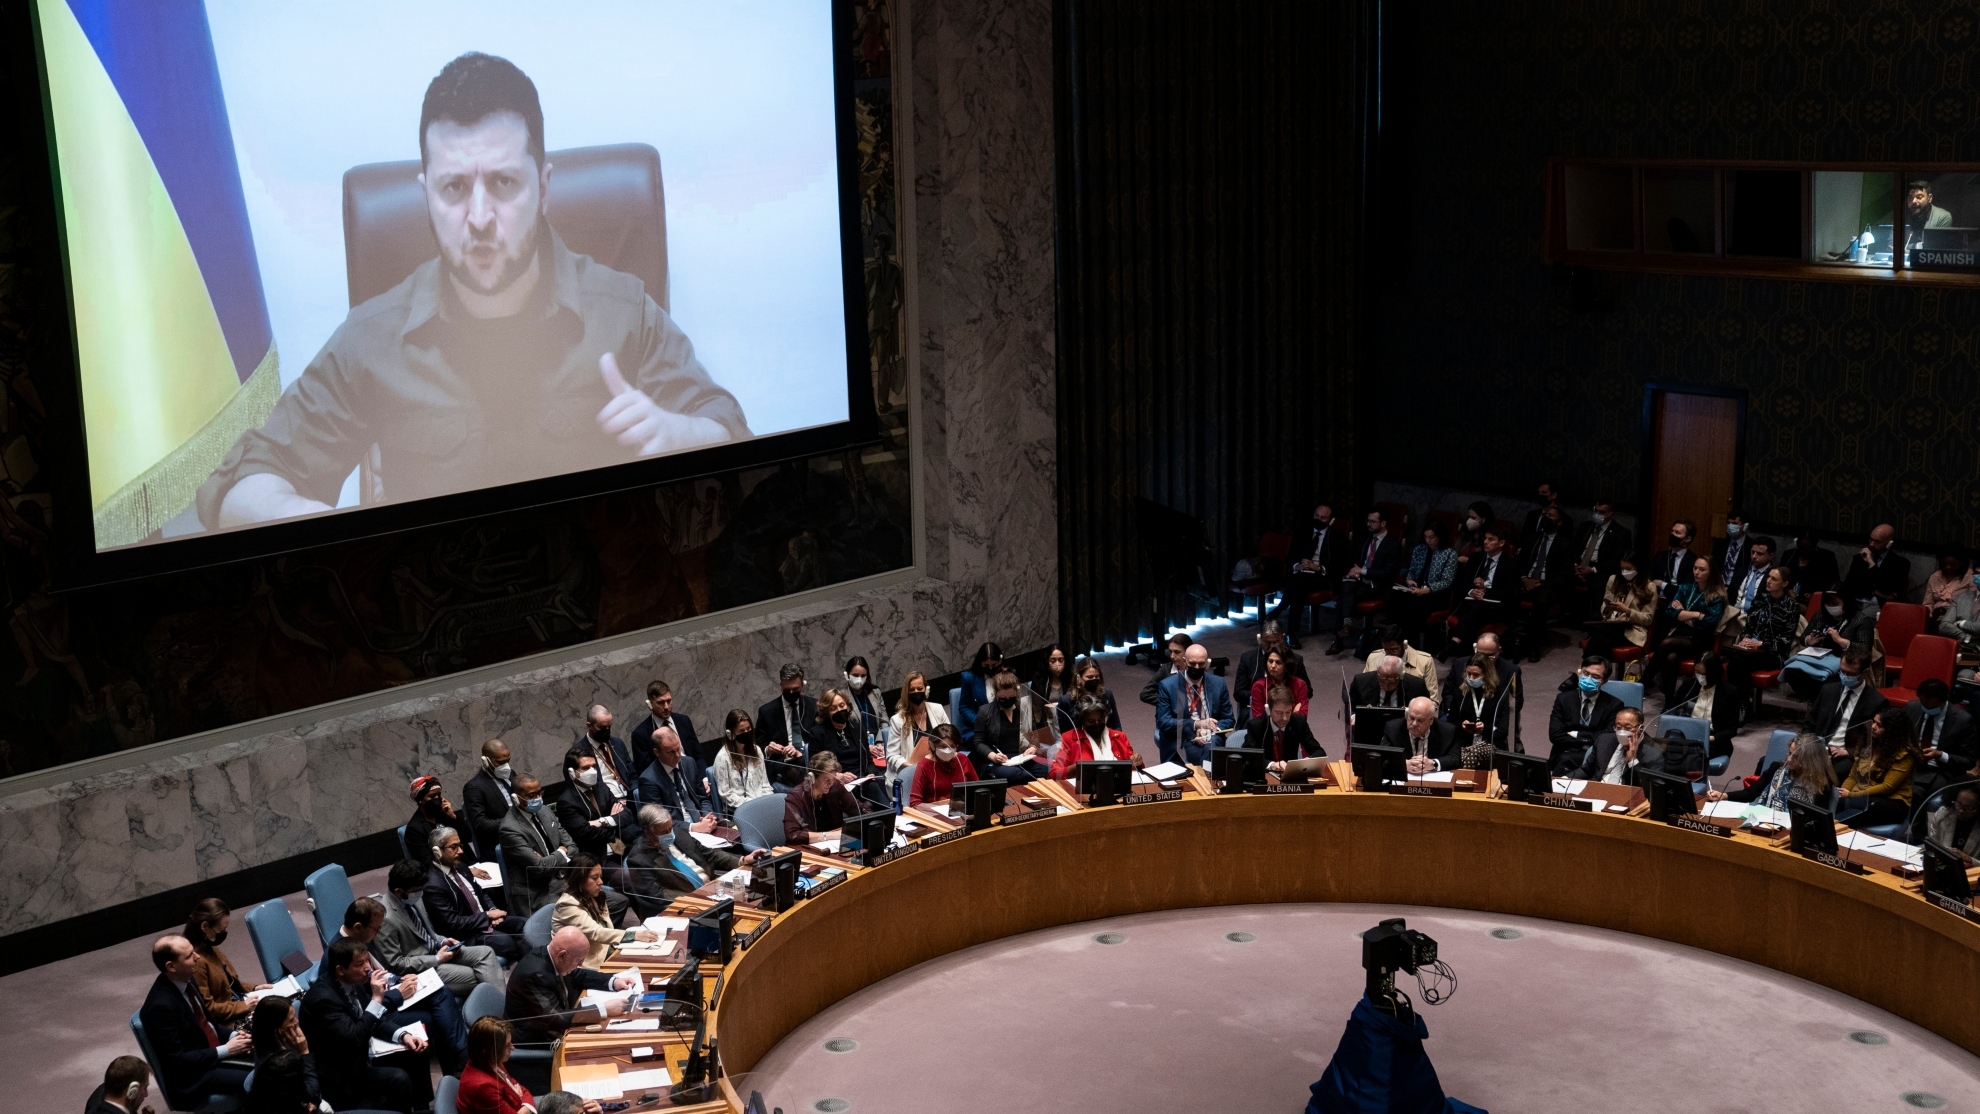 Ukrainian President Volodymyr Zelenskyy speaks via remote feed during a meeting of the UN Security Council